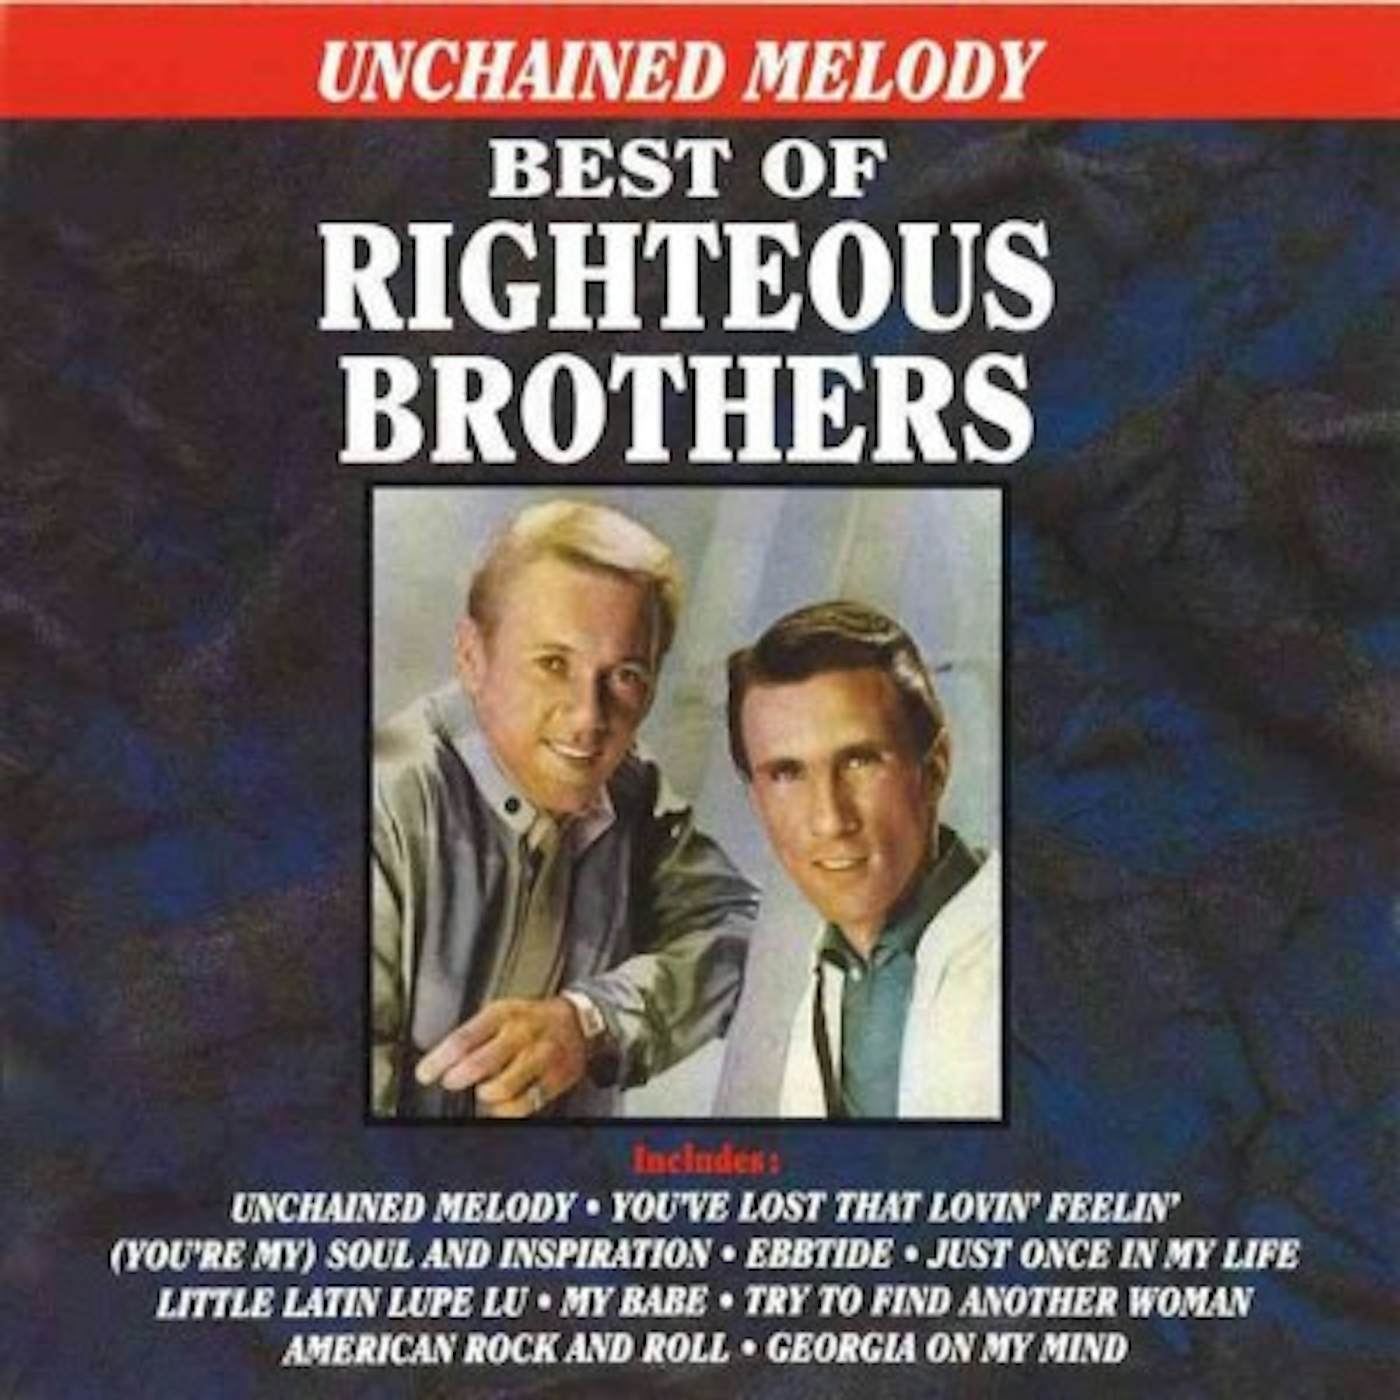 The Righteous Brothers UNCHAINED MELODY CD